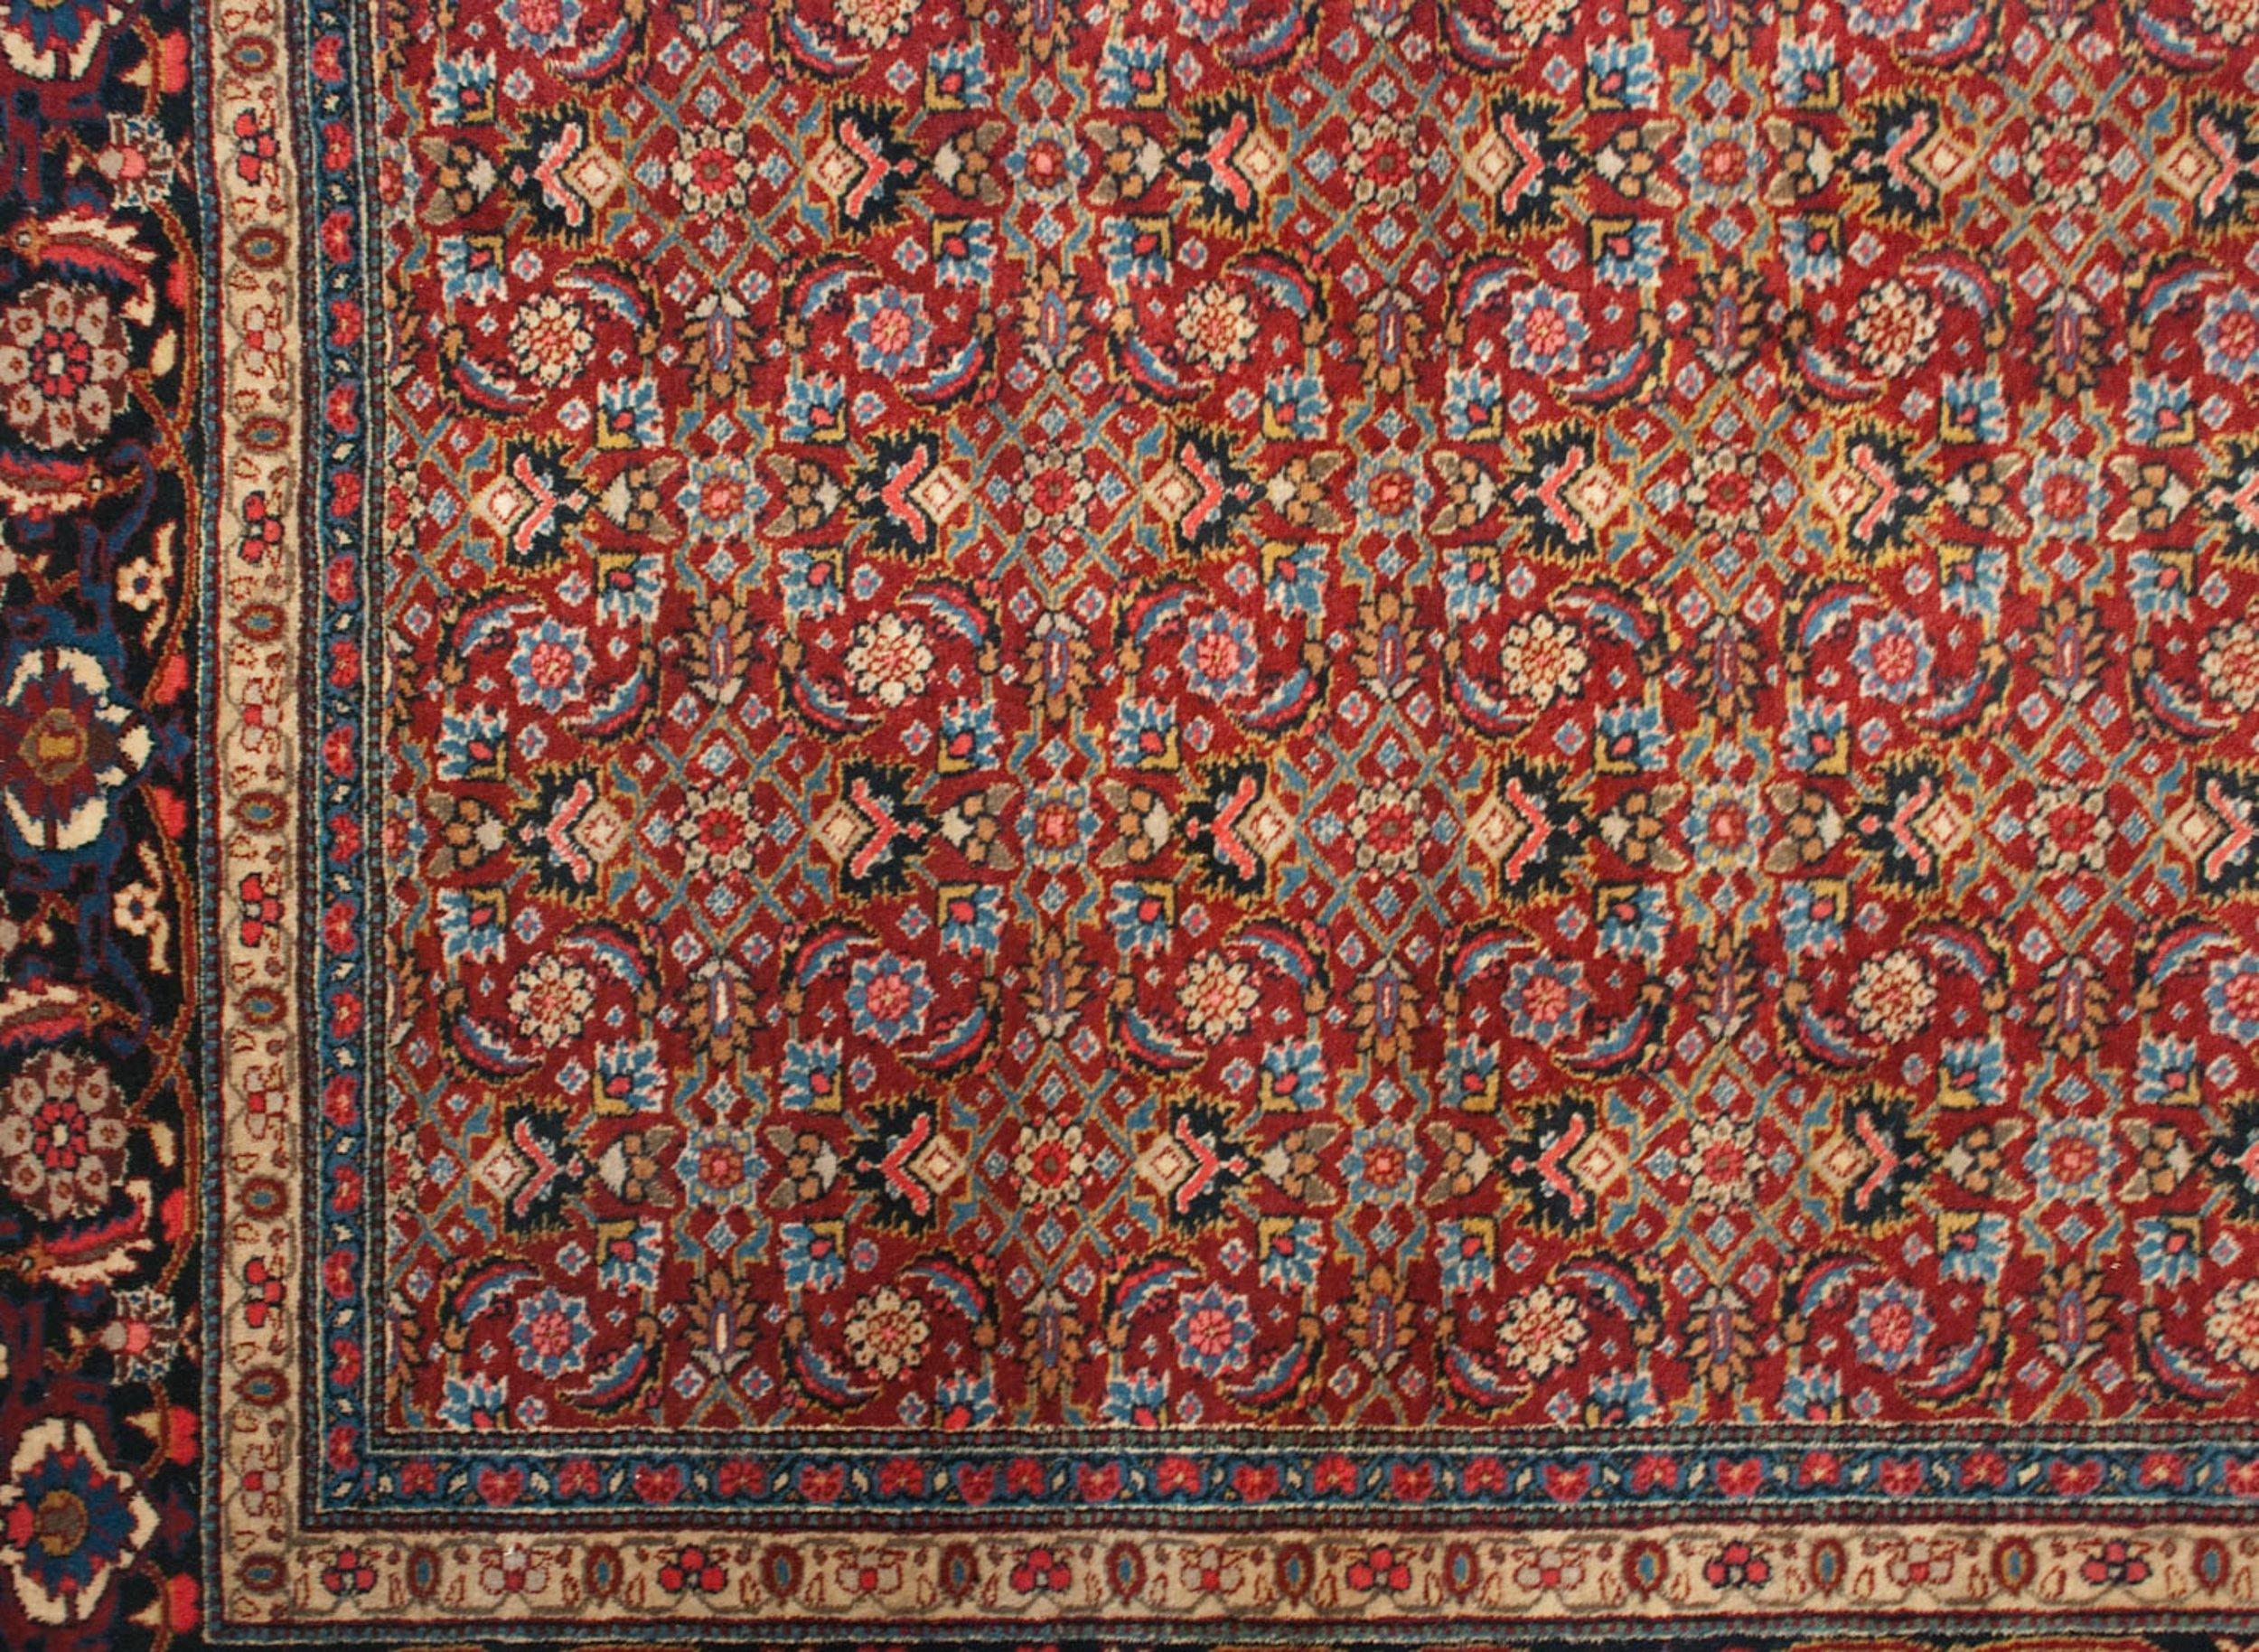 :: Allover repeating Herati motif in a highly intricate rendering with design density defining a faint lattice orientation paneled appearance. Main border in a Samovar, pomegranate, and oversized partial Herati motif, all interconnected by